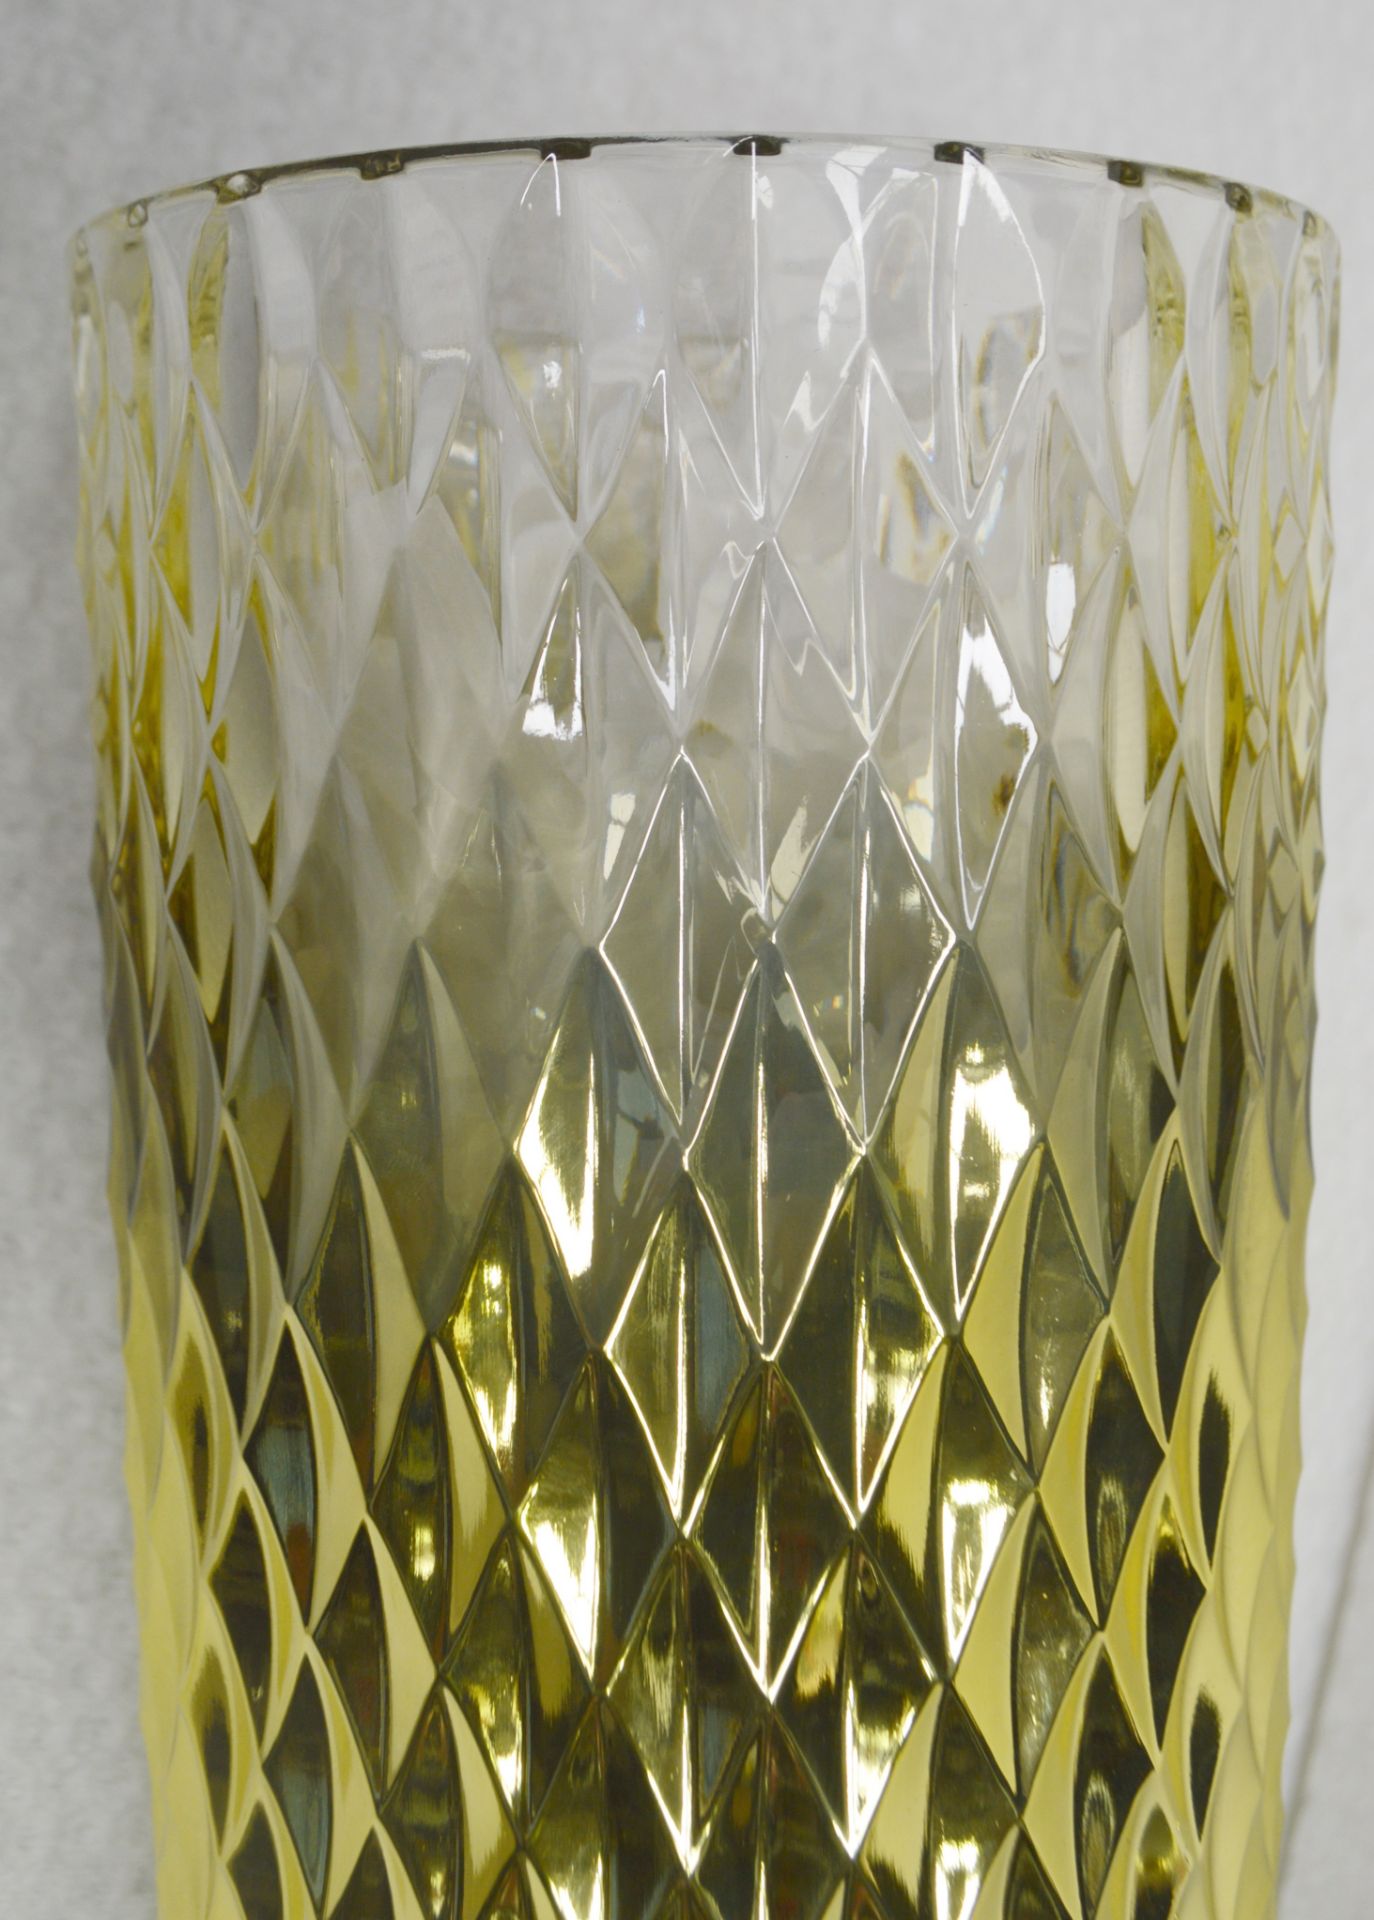 1 x BALDI 'Home Jewels' Italian Hand-crafted Artisan Crystal Vase With A Graduated Gold Tint - Image 4 of 6